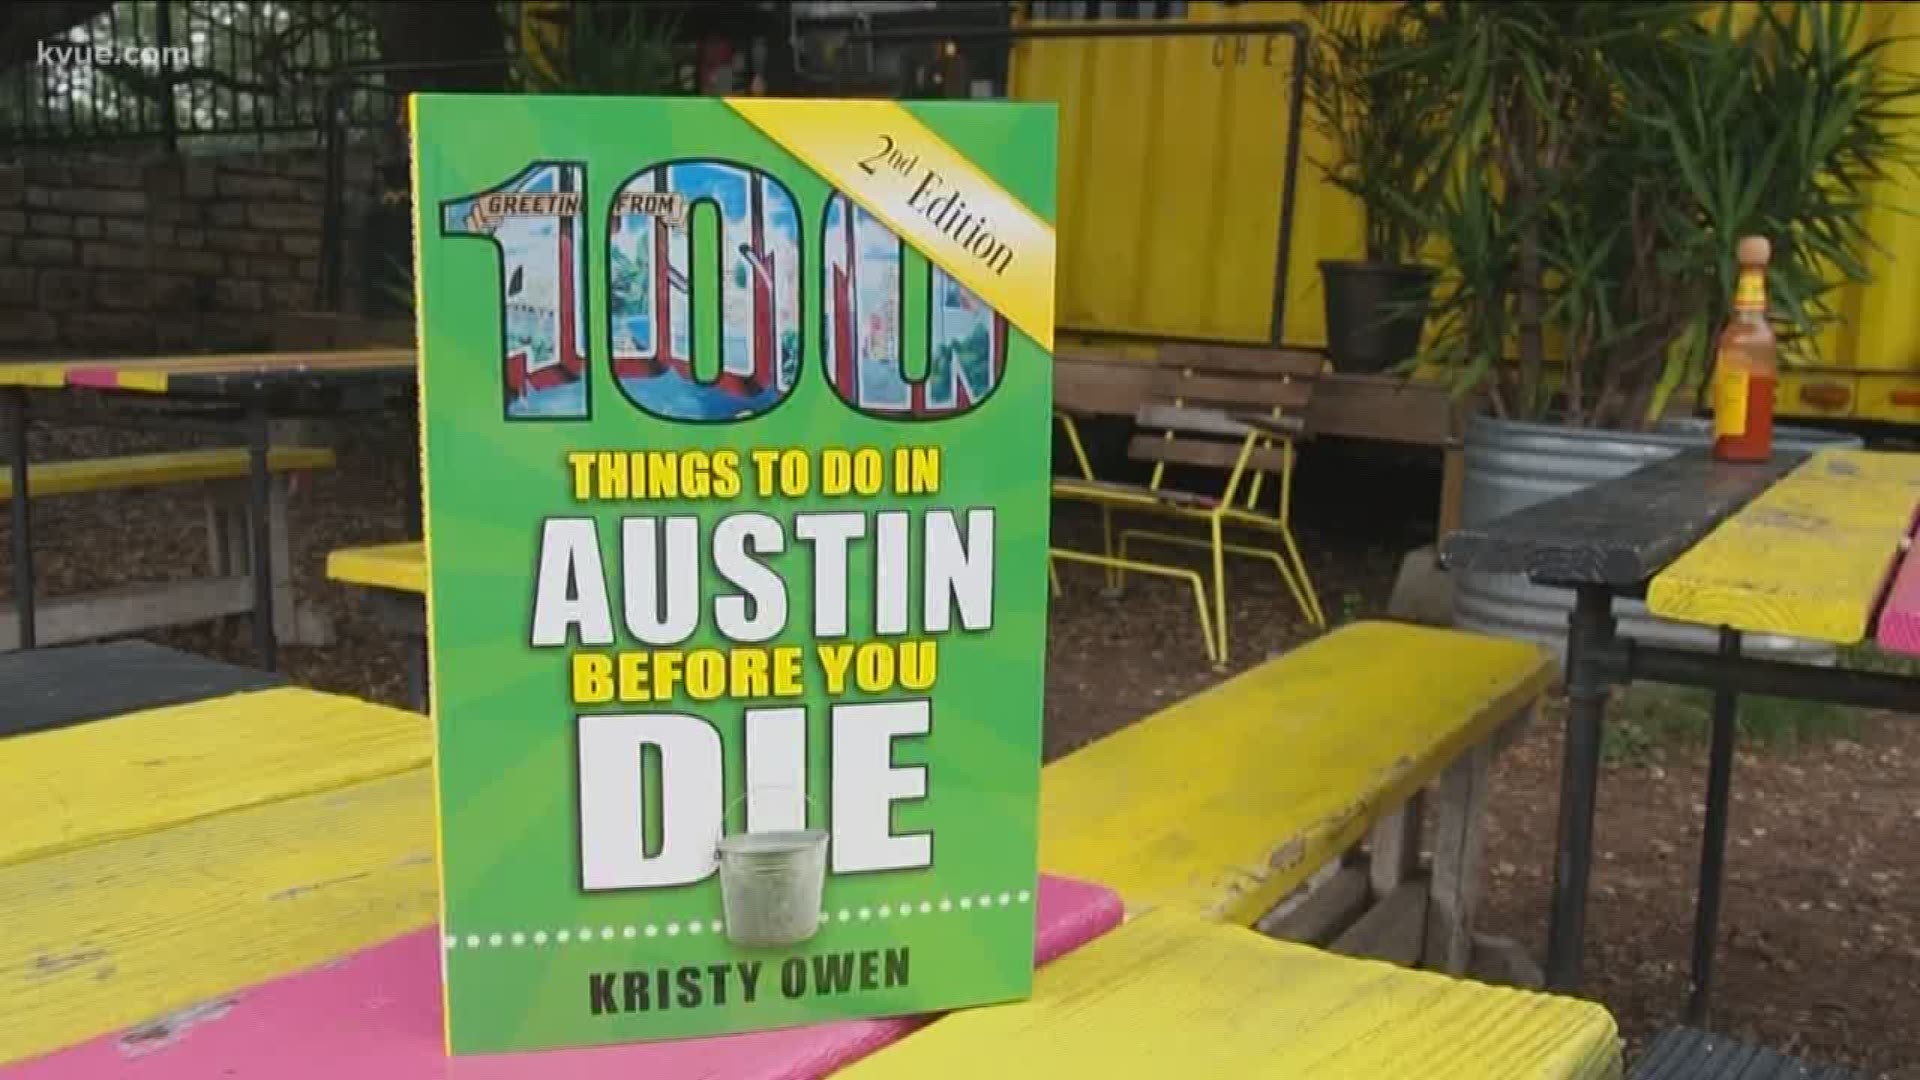 Brittany Flowers talked to the author about why she wrote "100 Things to Do in Austin Before You Die" and what she has planned next.